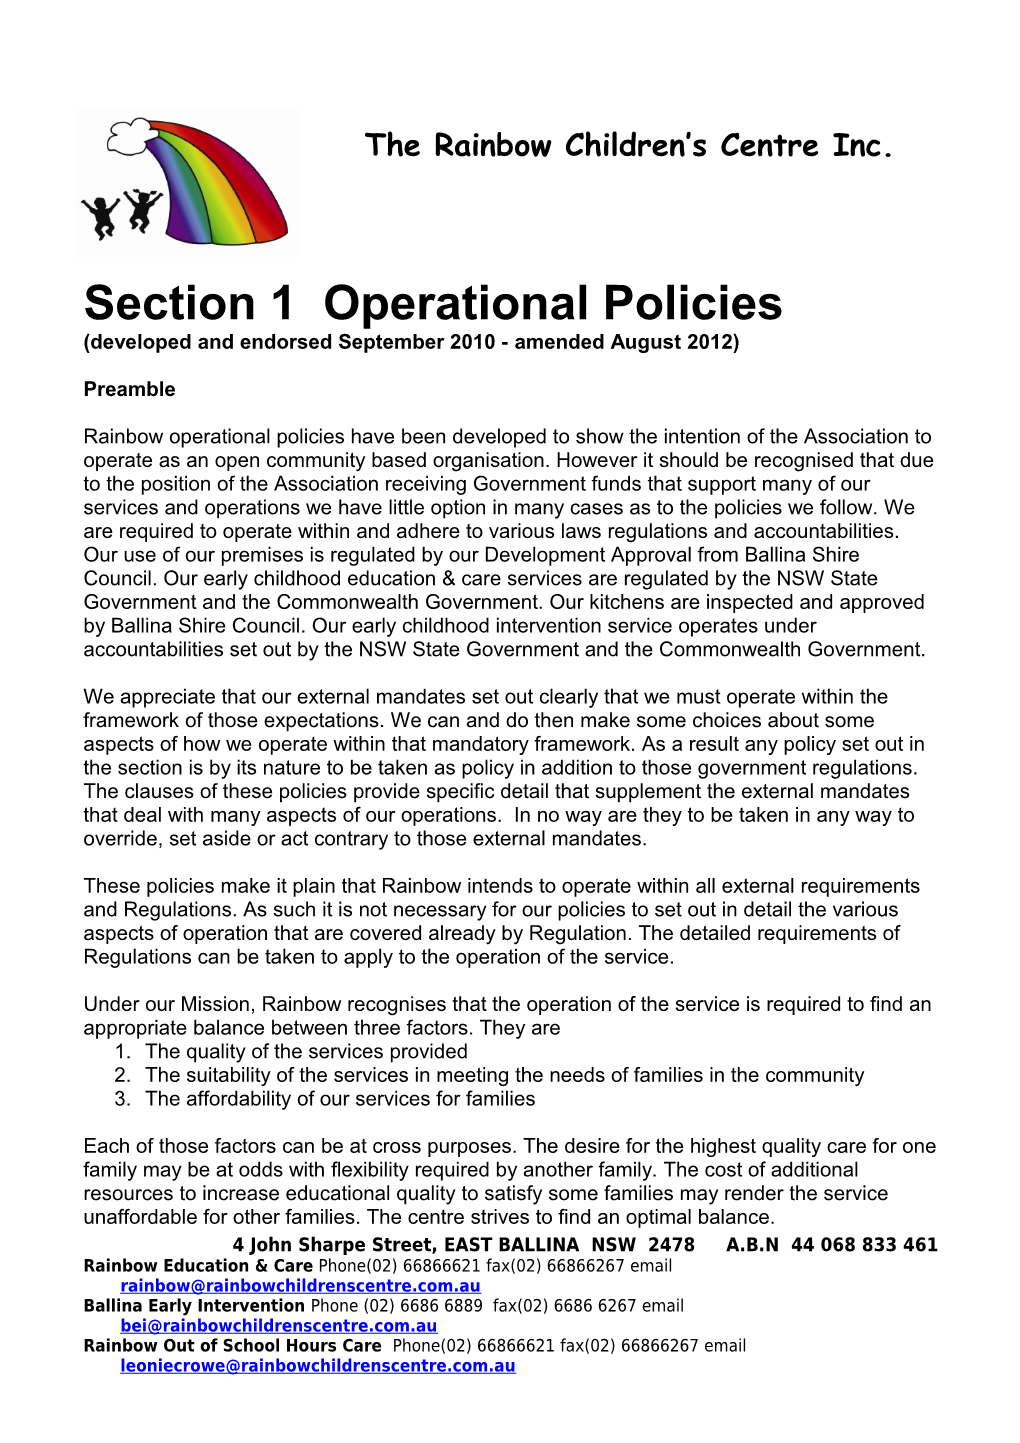 Rainbow Childrens Centre Policy Section 1 Operational Policies Endorsed August 2012Page 1